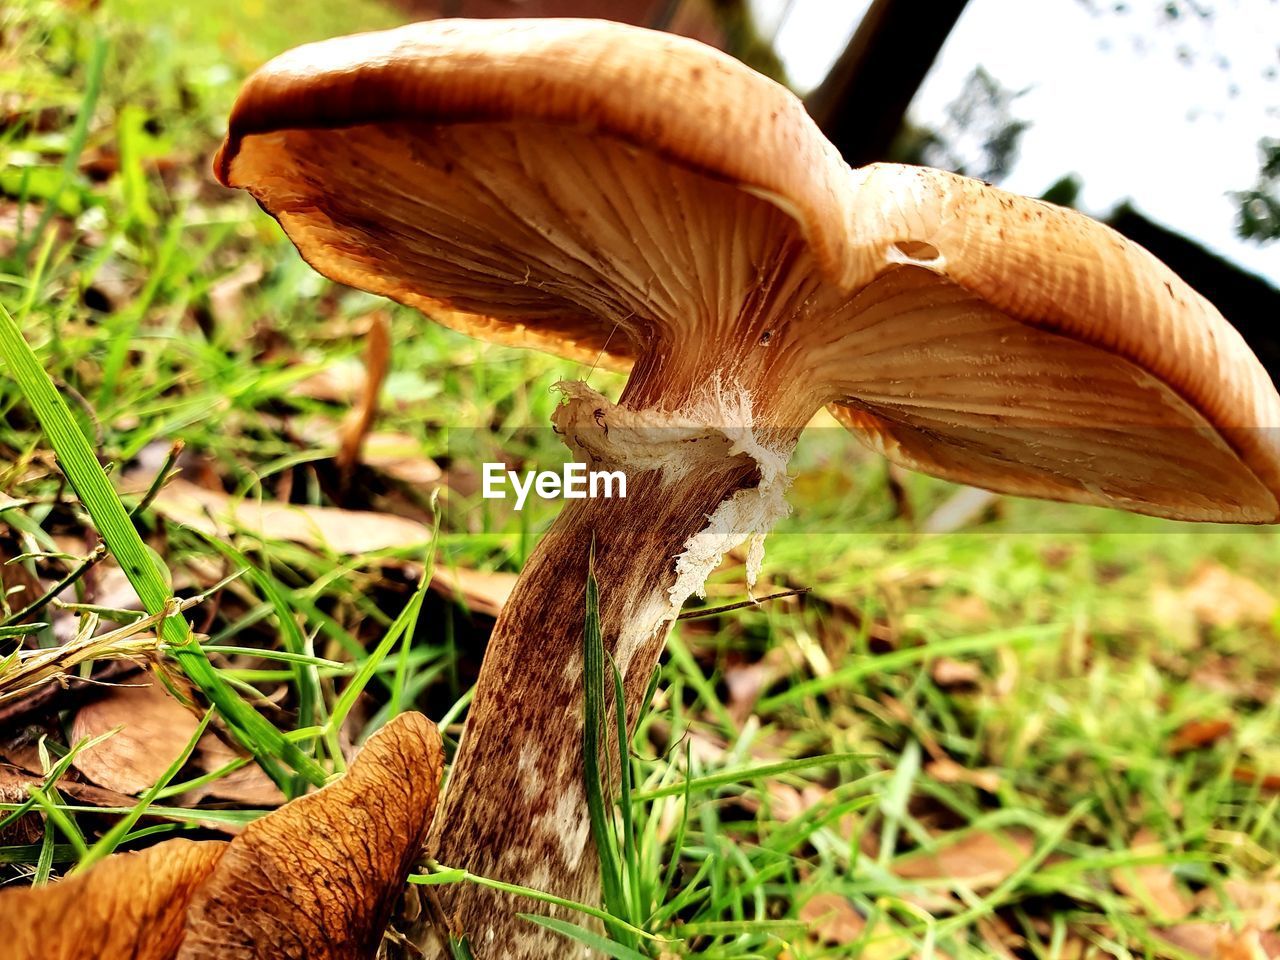 plant, land, growth, fungus, mushroom, field, close-up, no people, vegetable, food, nature, grass, day, focus on foreground, toadstool, beauty in nature, forest, edible mushroom, brown, outdoors